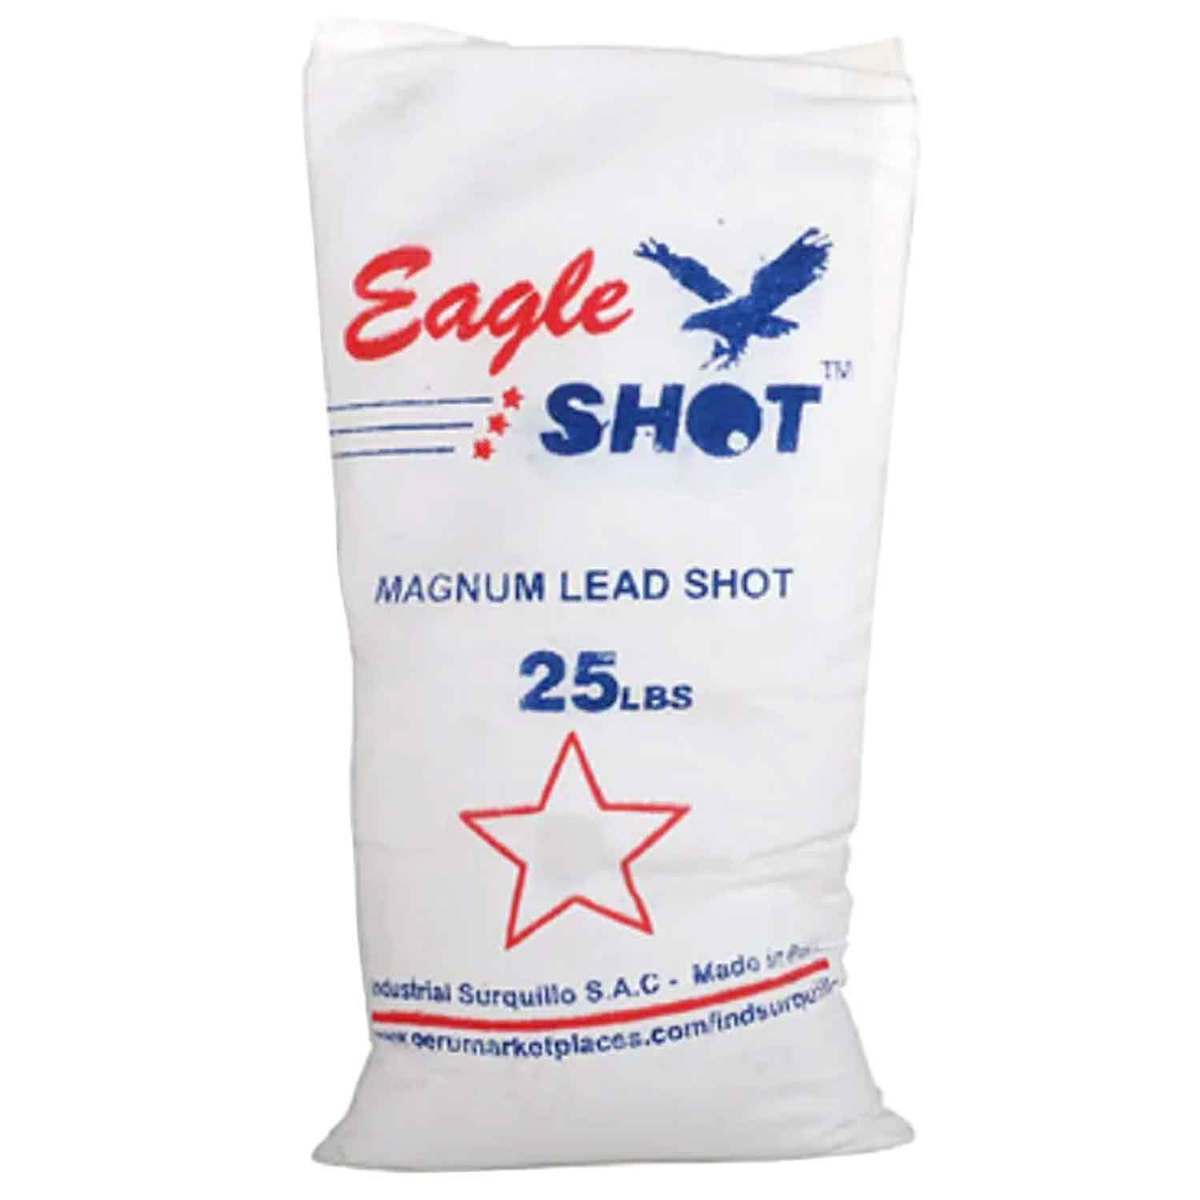  Lead Shot Balls #7.5 Bag 4 lbs (64 oz / 1.8 Kg) Made in USA -  Free Shipping : Sports & Outdoors